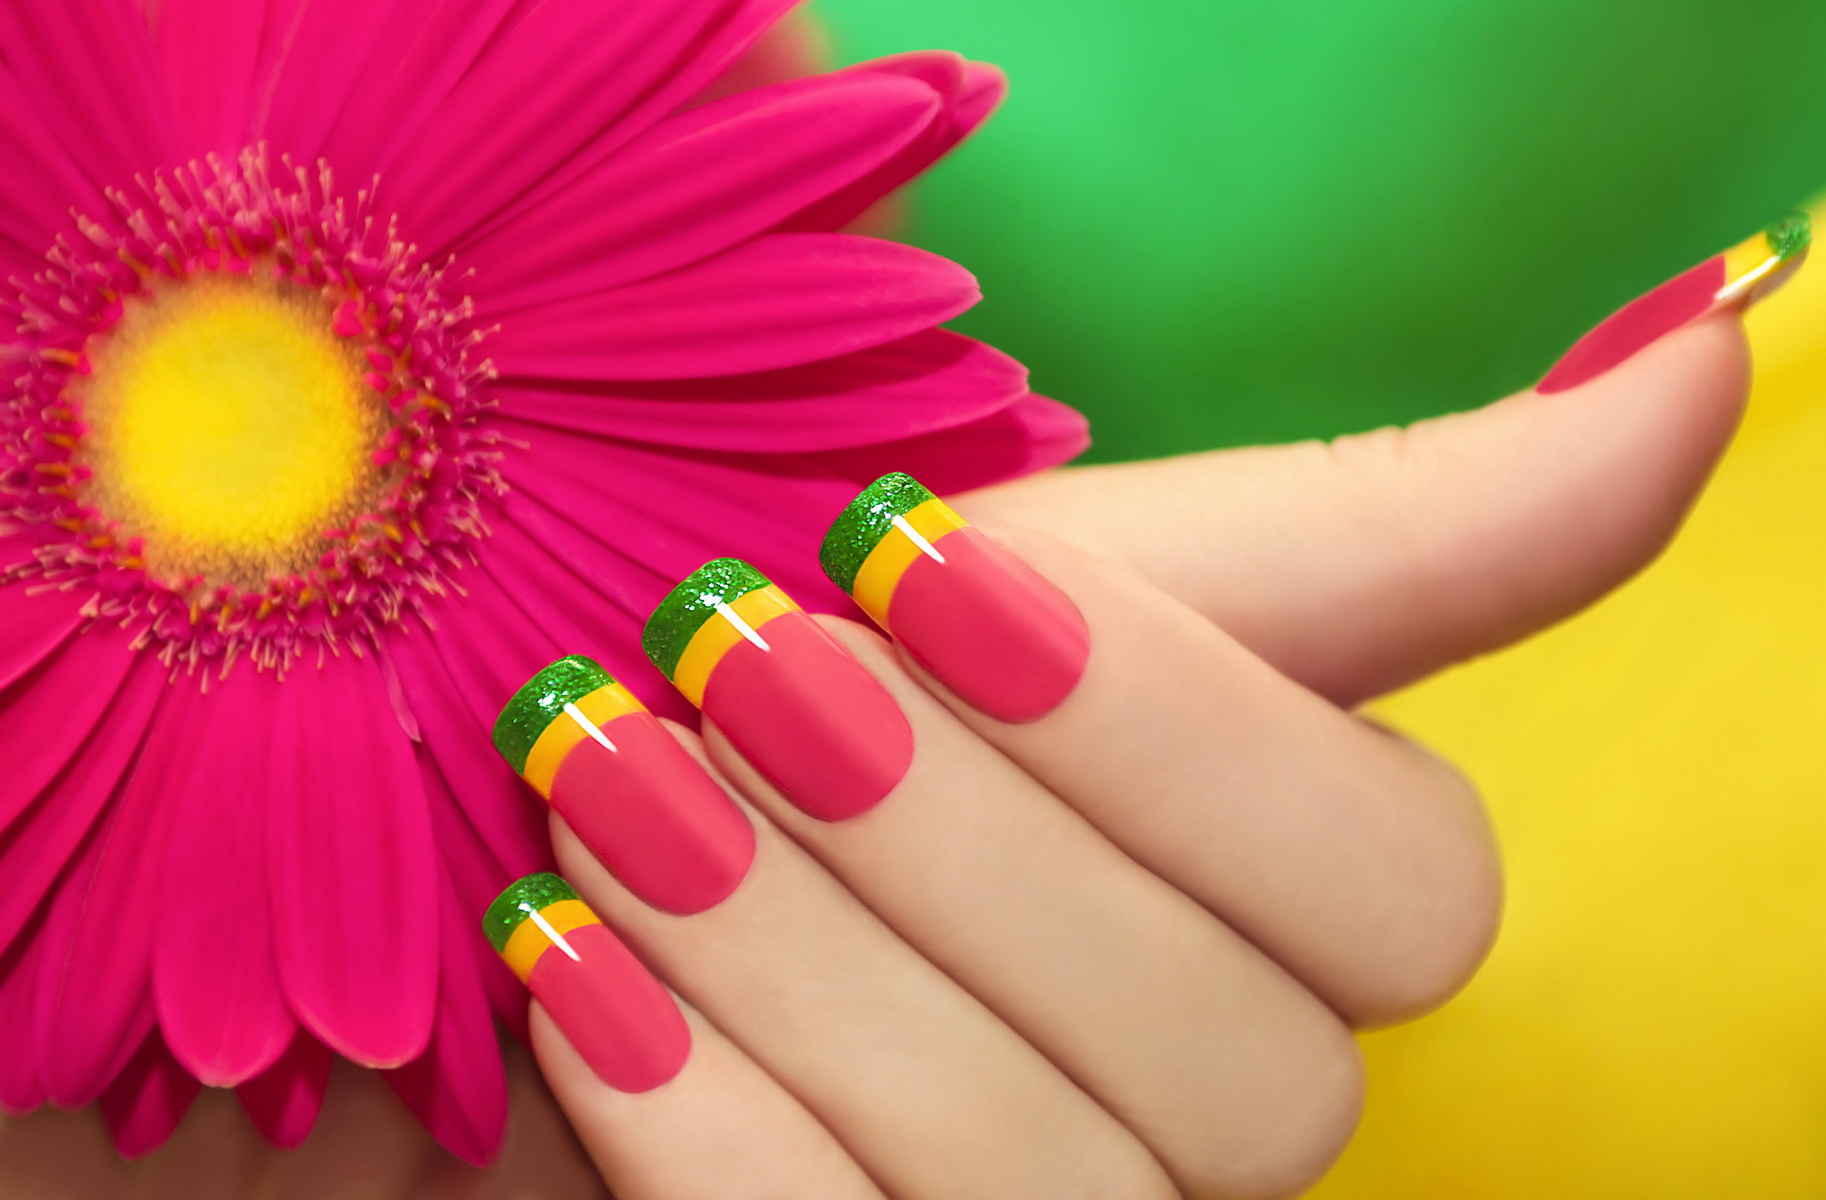 Nail Salon 46038 | LV Nails of Fishers, IN 46038 | Manicure, Pedicure, Nail  Services, Additional Services, Kids Service